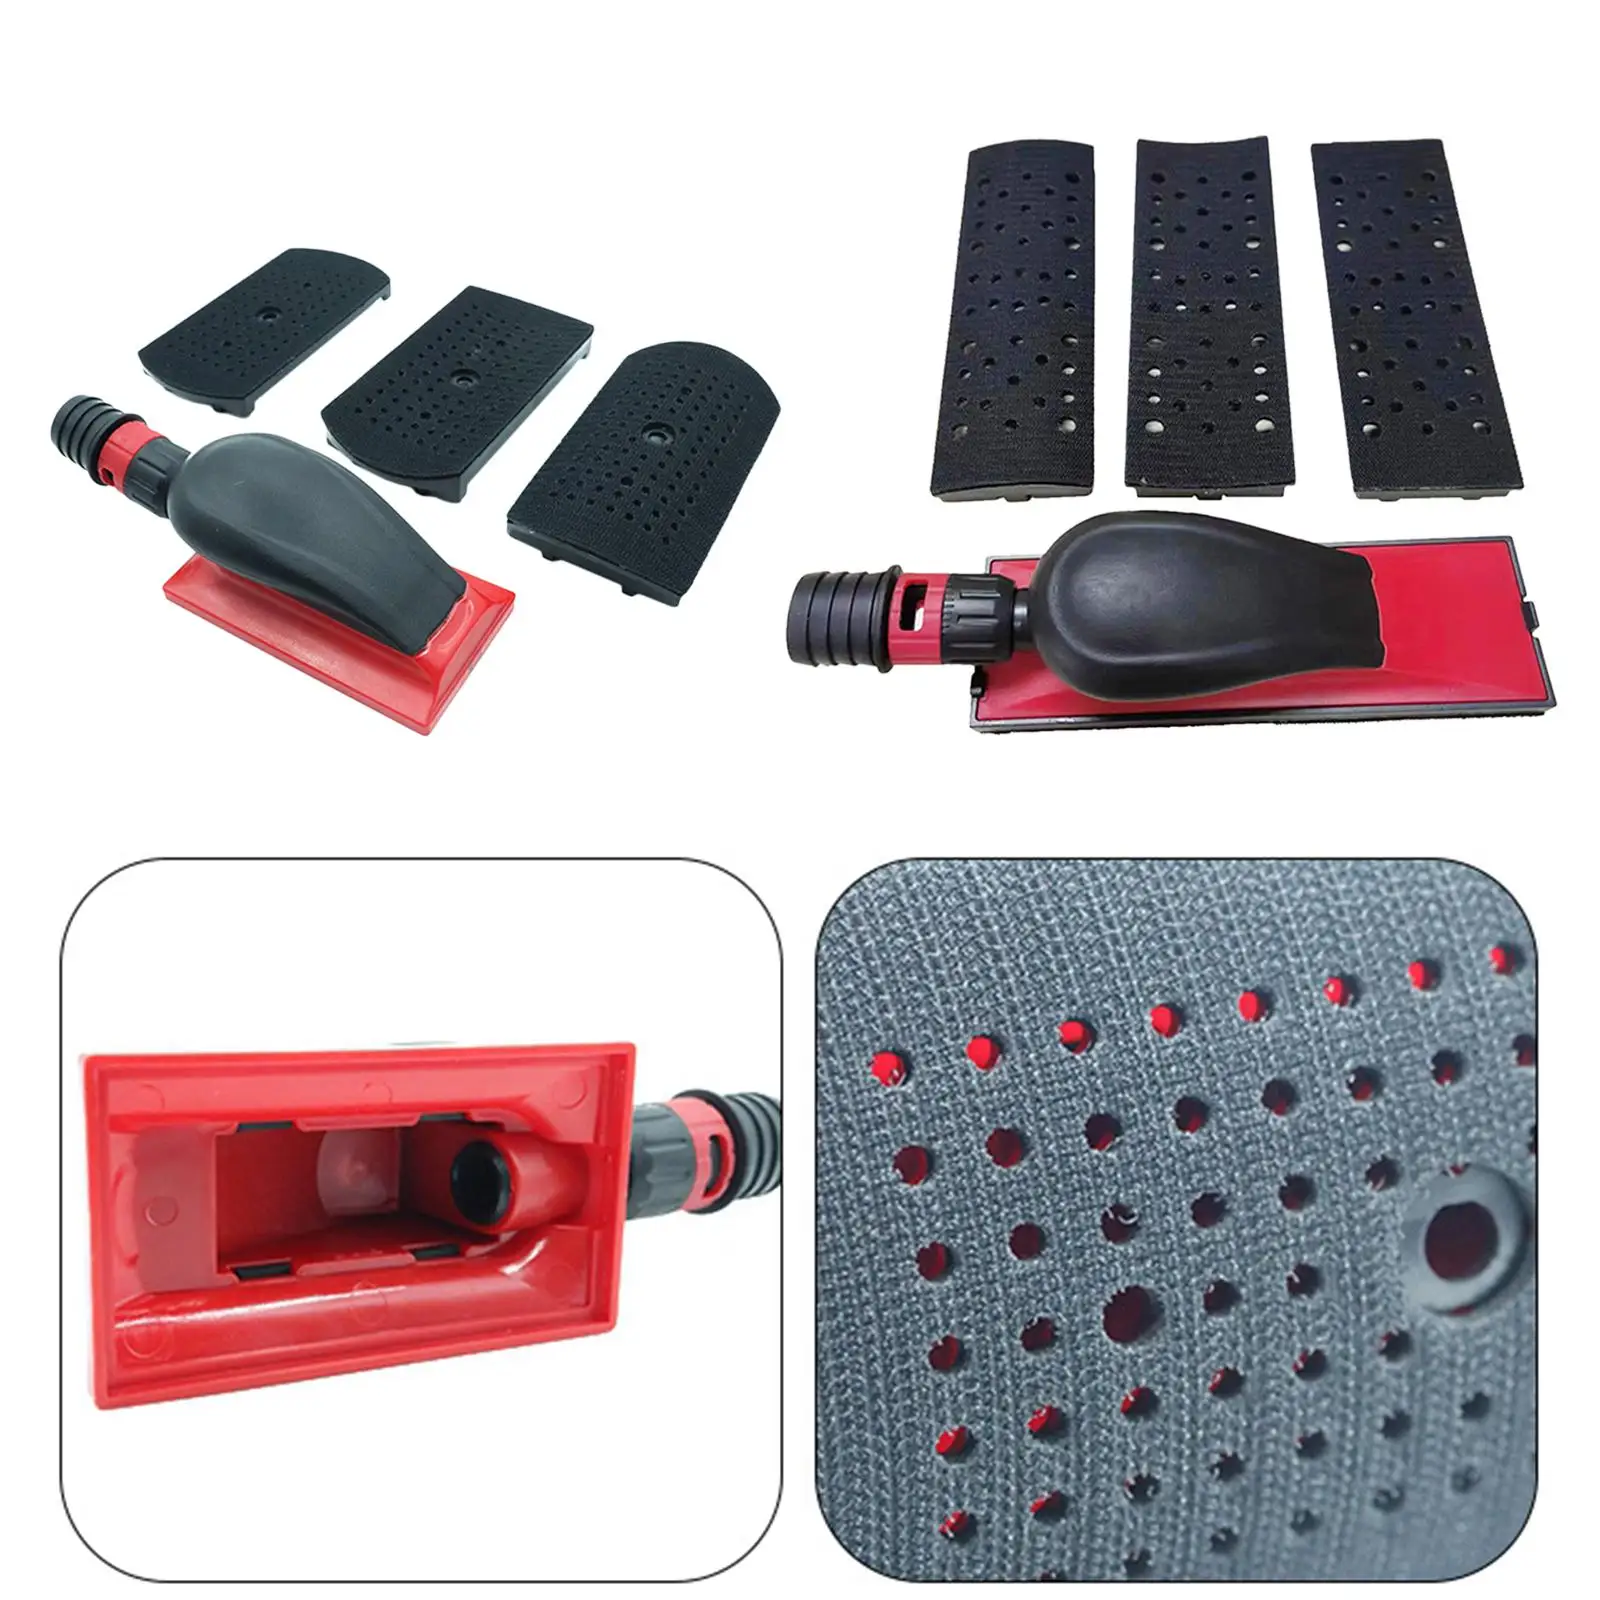 Hand Sanding Block Dust Extraction Dry Grinding Push Board for Furniture Making Wood Work Drywalling Industrial Shops Polishing